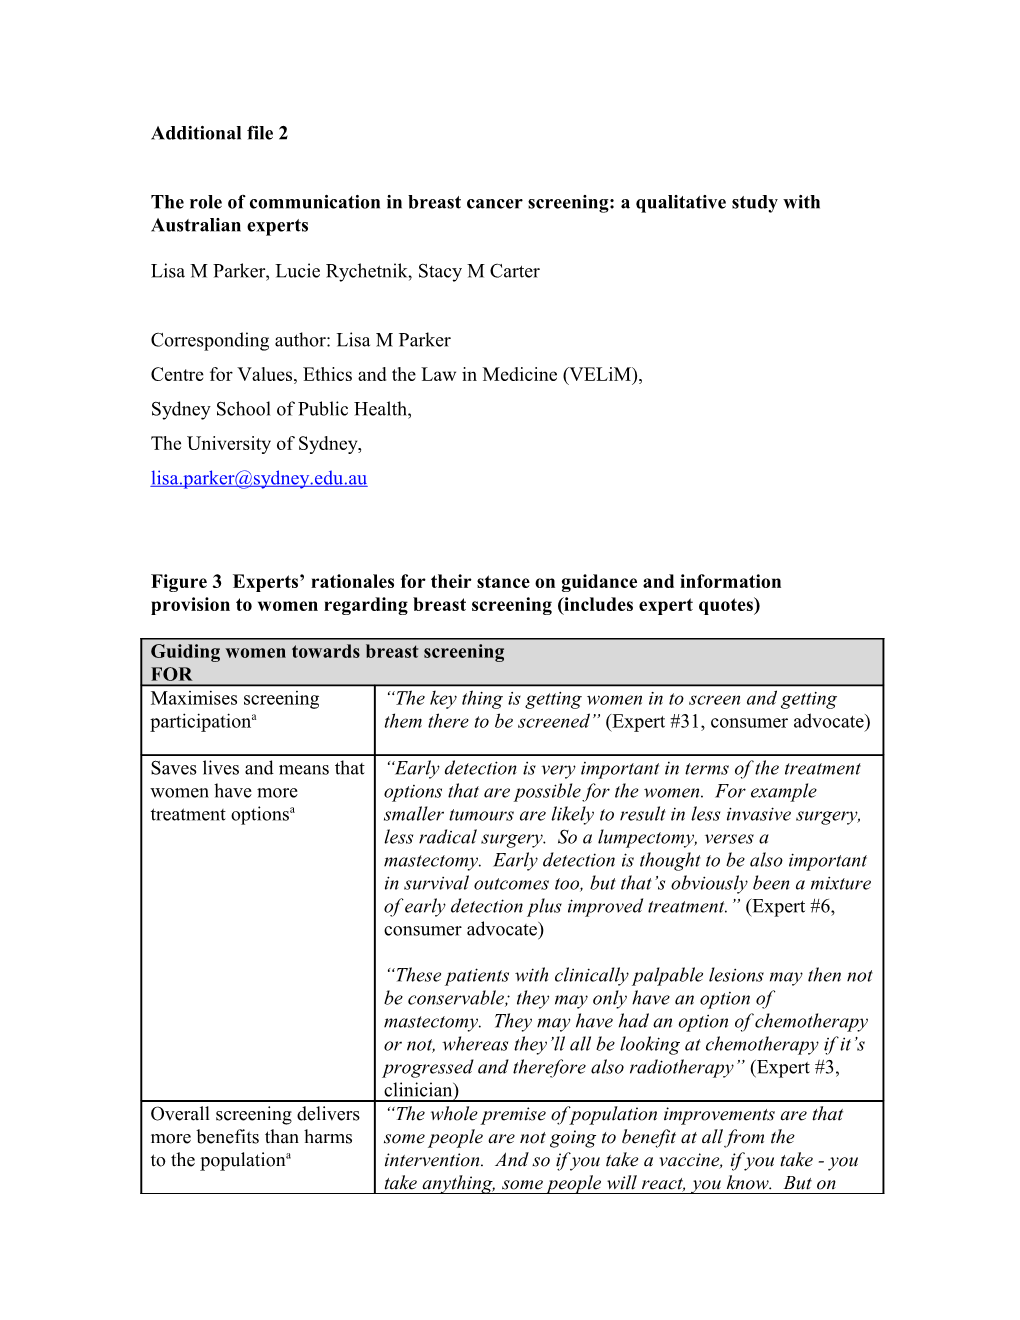 The Role of Communication in Breast Cancer Screening: a Qualitative Study with Australian